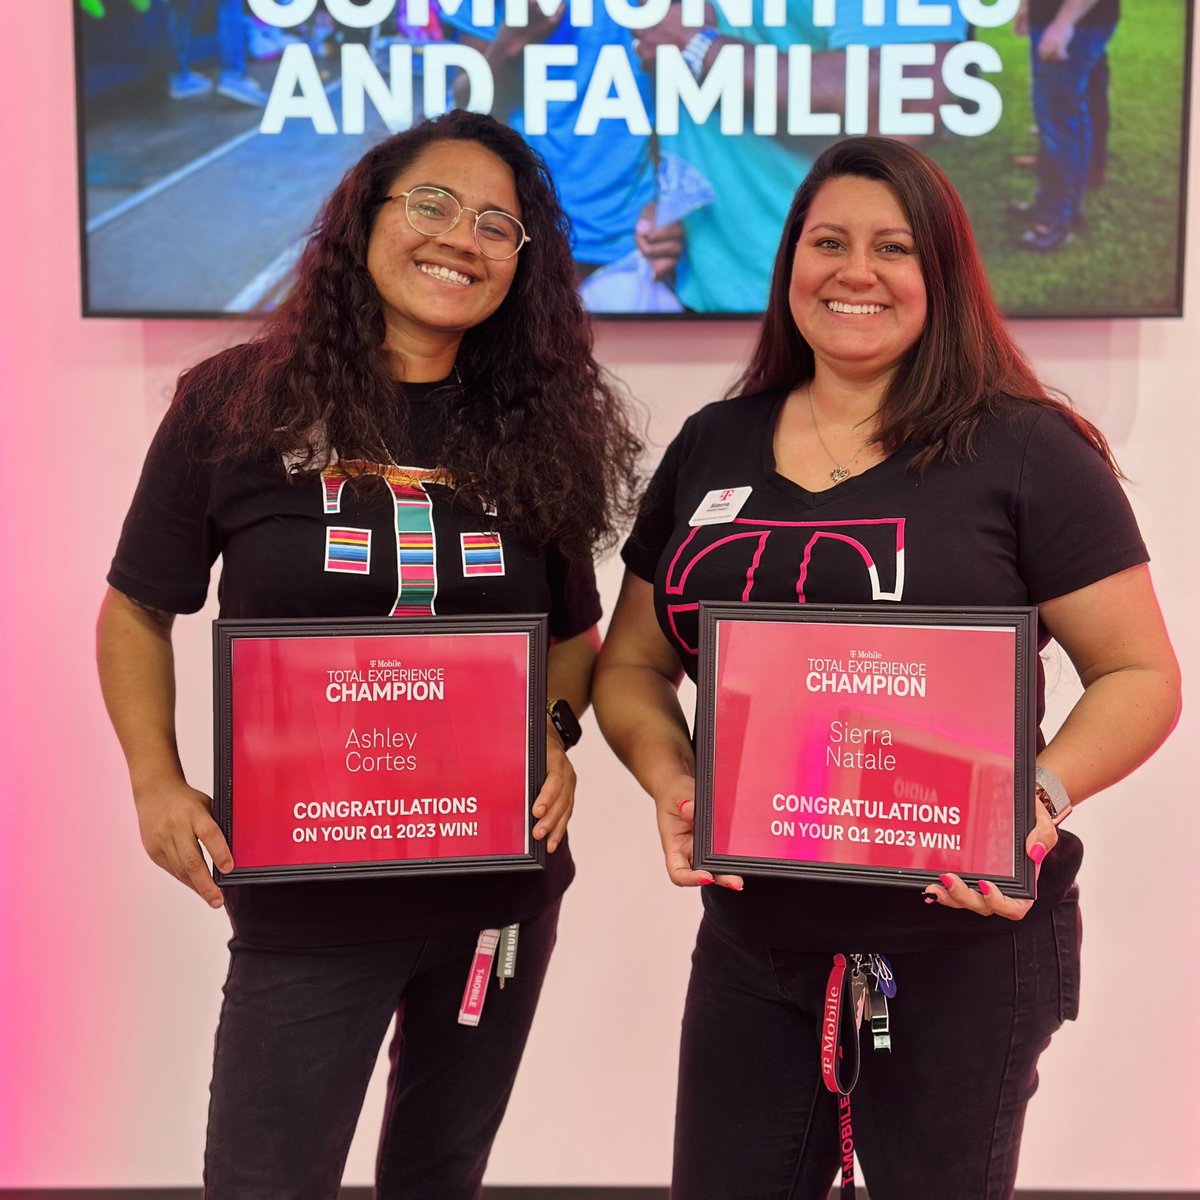 🥳🥳CONGRATULATIONS!!!🥳🥳 ⚡️ Titusville Thunder’s ⚡️ Q1 TOTAL EXPERIENCE CHAMPIONS!! @Ash_5G @sierranatale #DOUBLETHUNDER #WinTogether #GoGrowWin